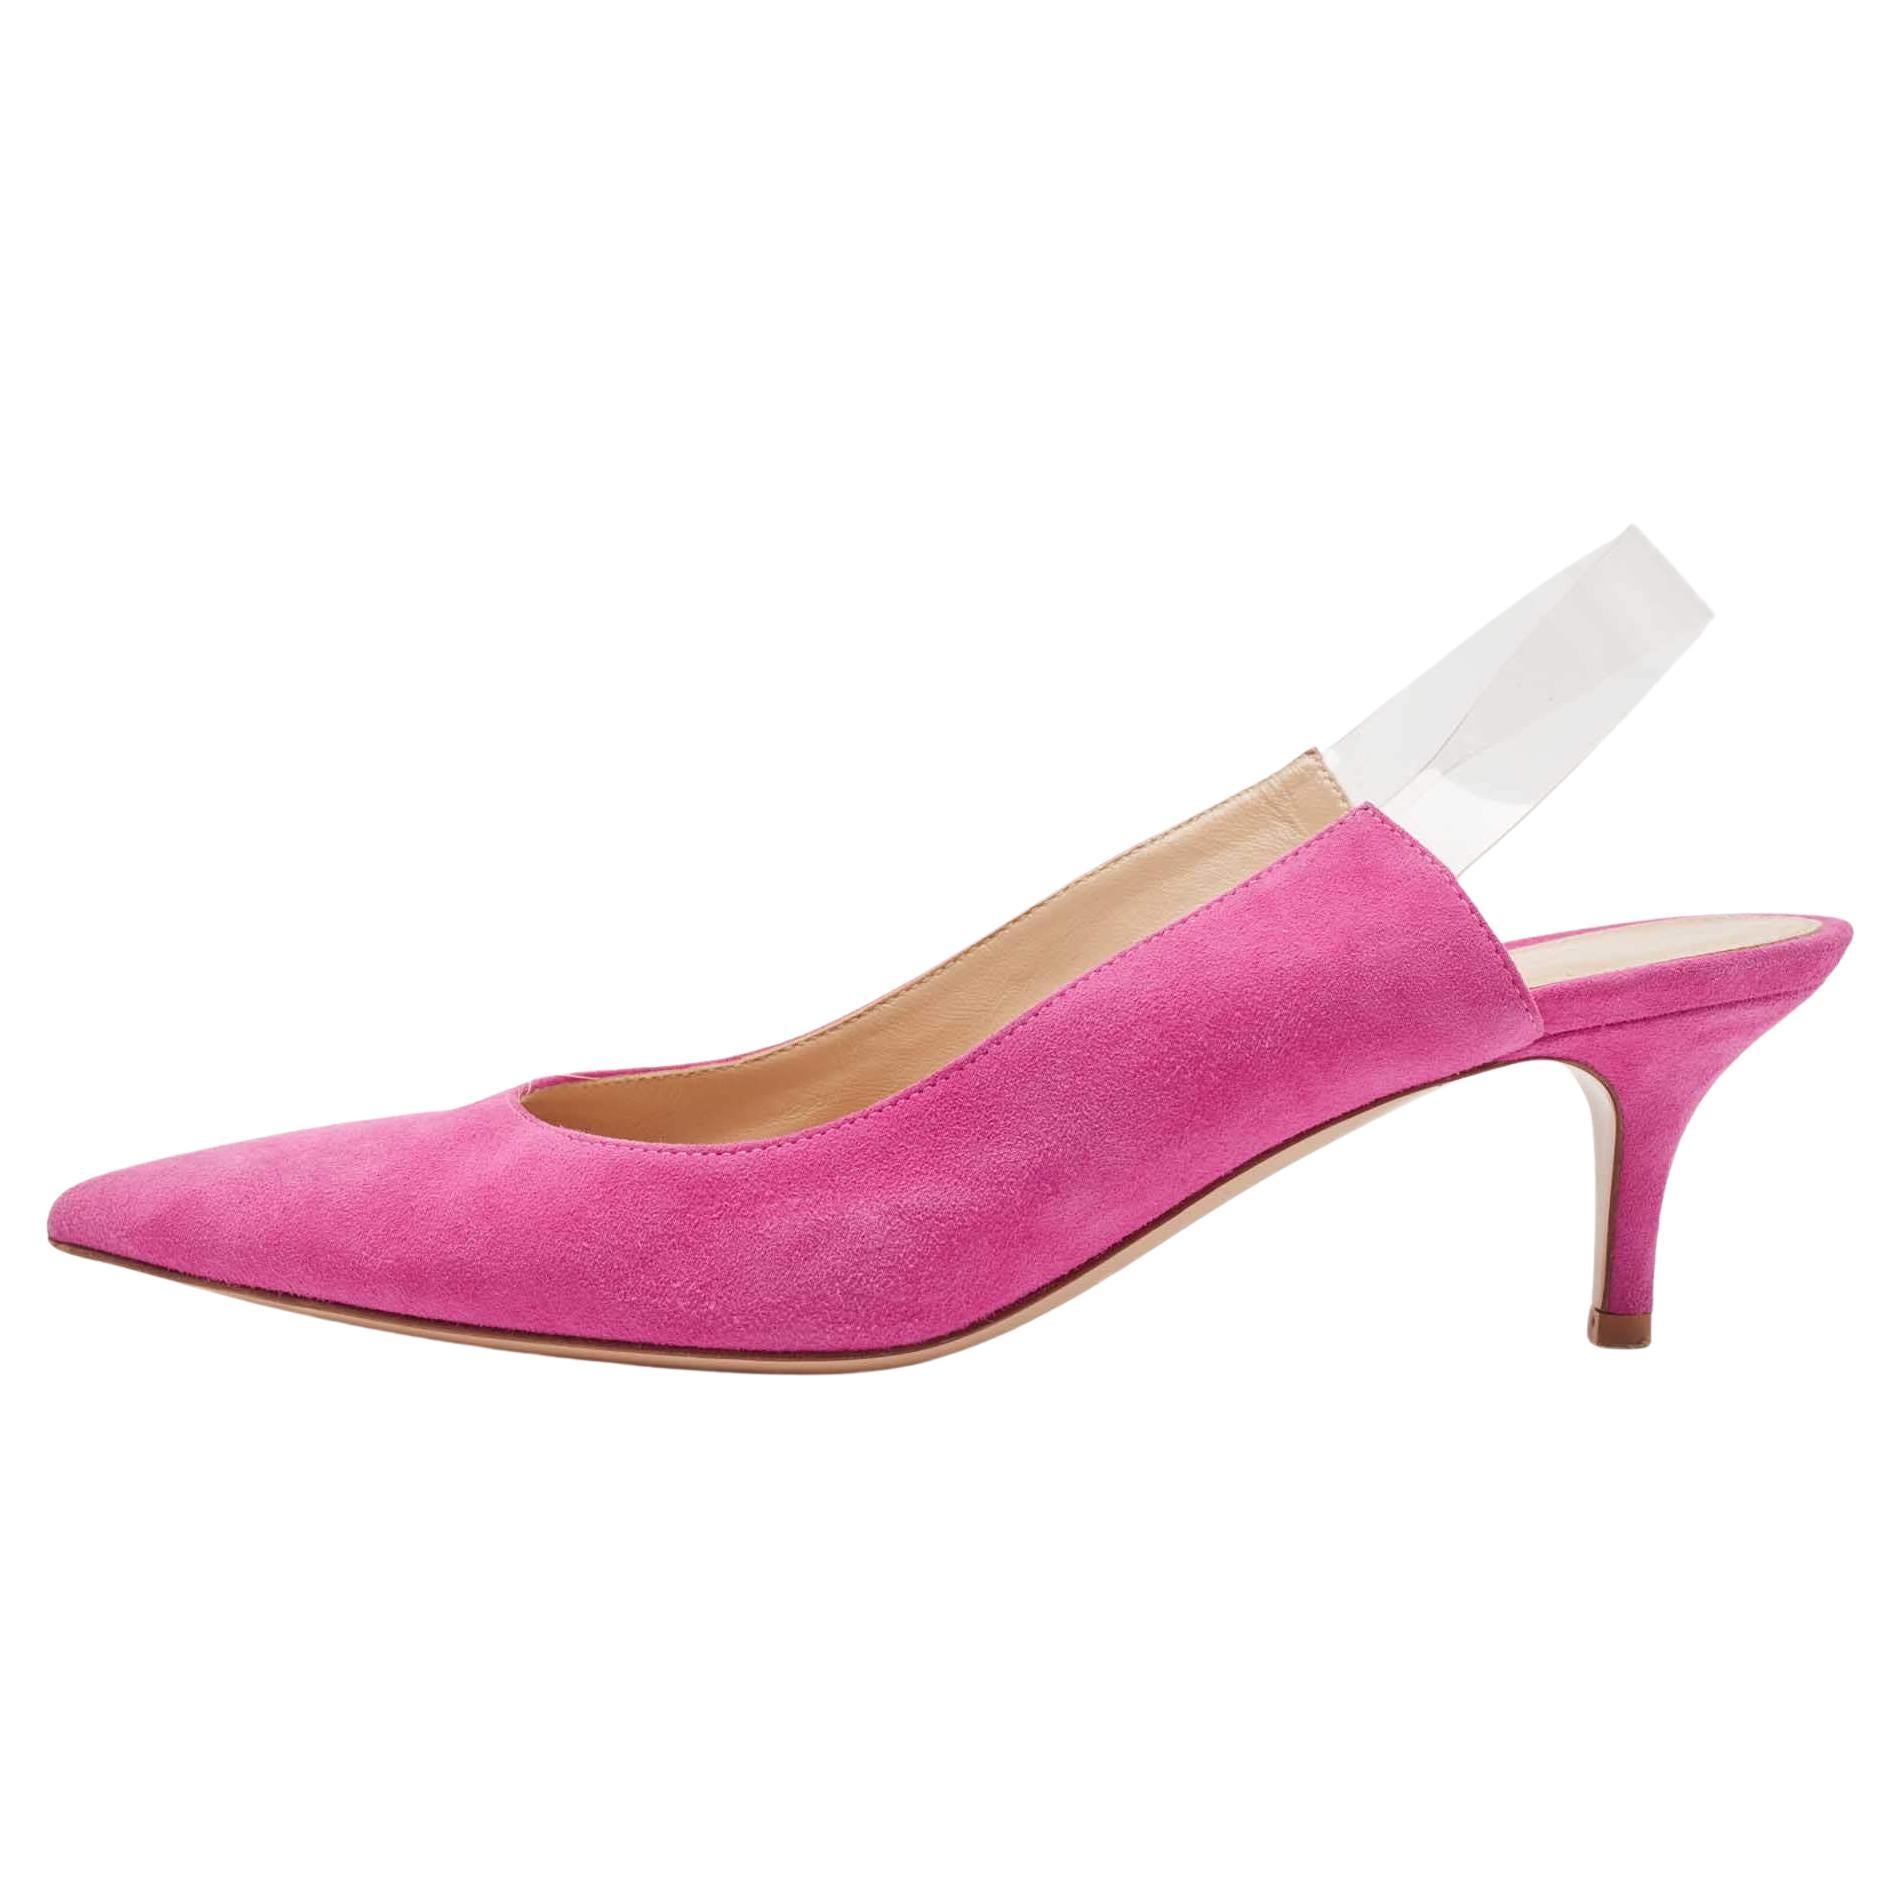 Gianvito Rossi Pink Suede and PVC Slingback Pumps Size 37.5